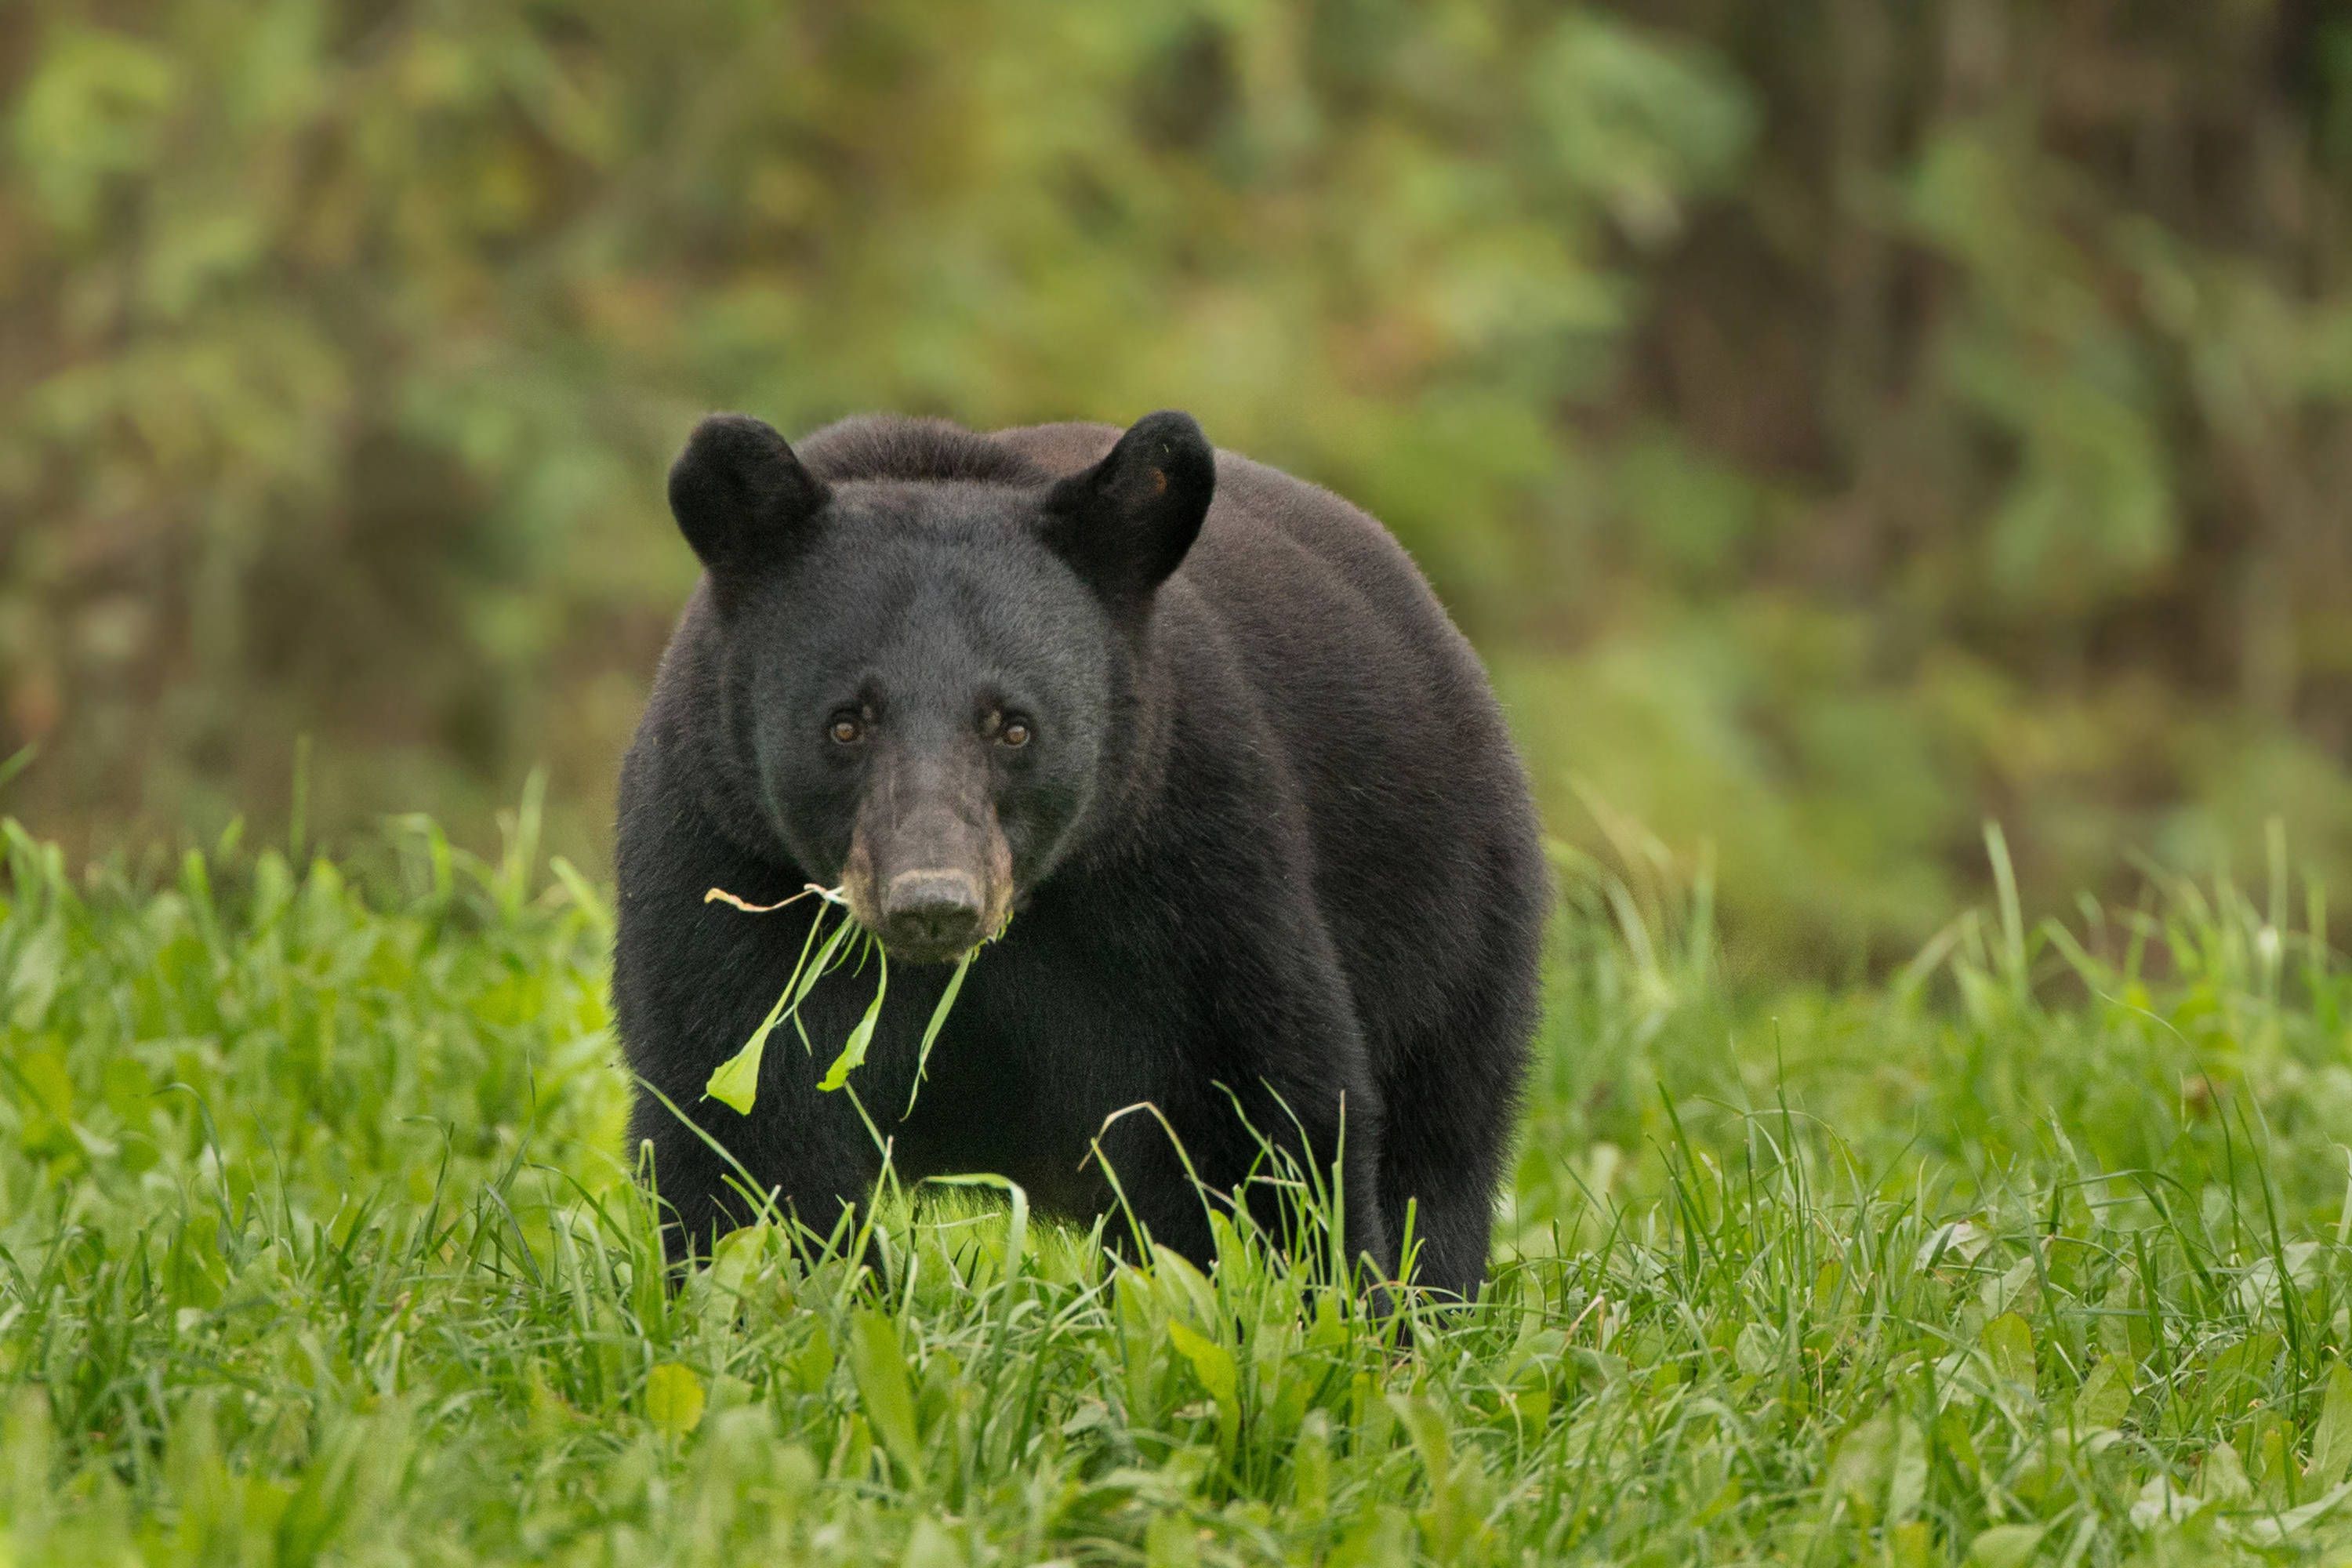 A large adult black bear plodding across a grassy field with vegetation in its mouth